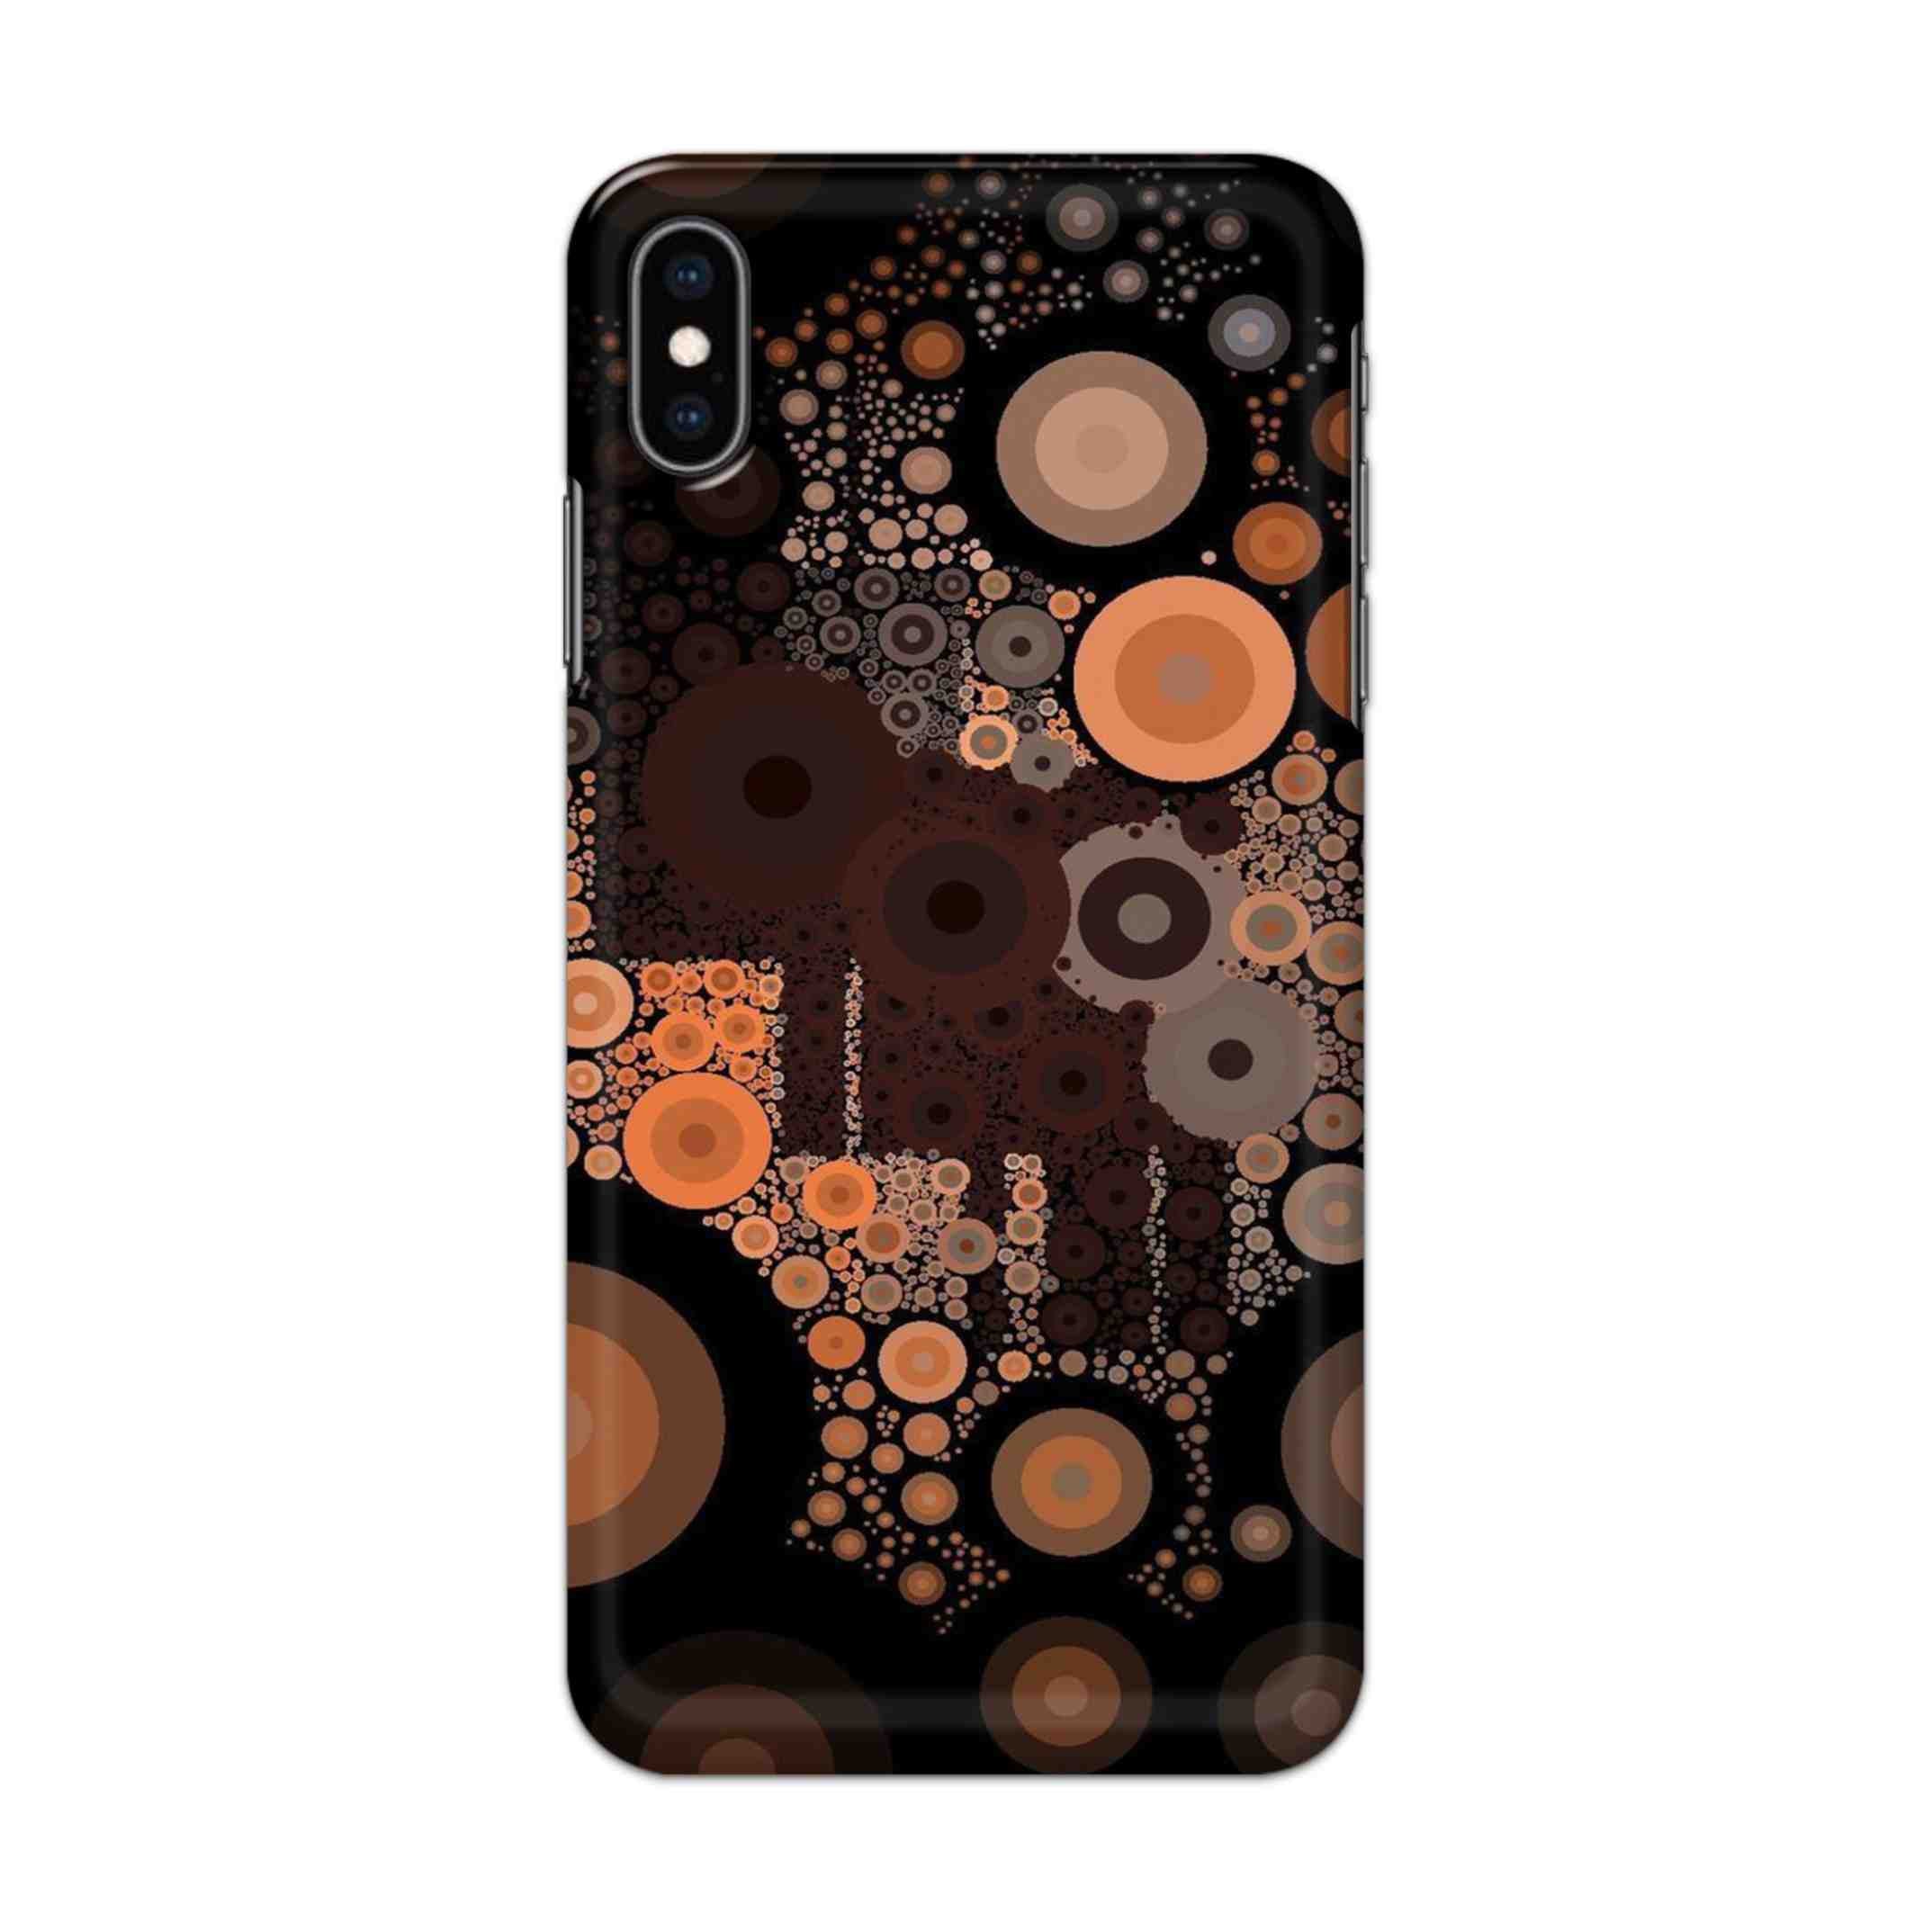 Buy Golden Circle Hard Back Mobile Phone Case/Cover For iPhone XS MAX Online